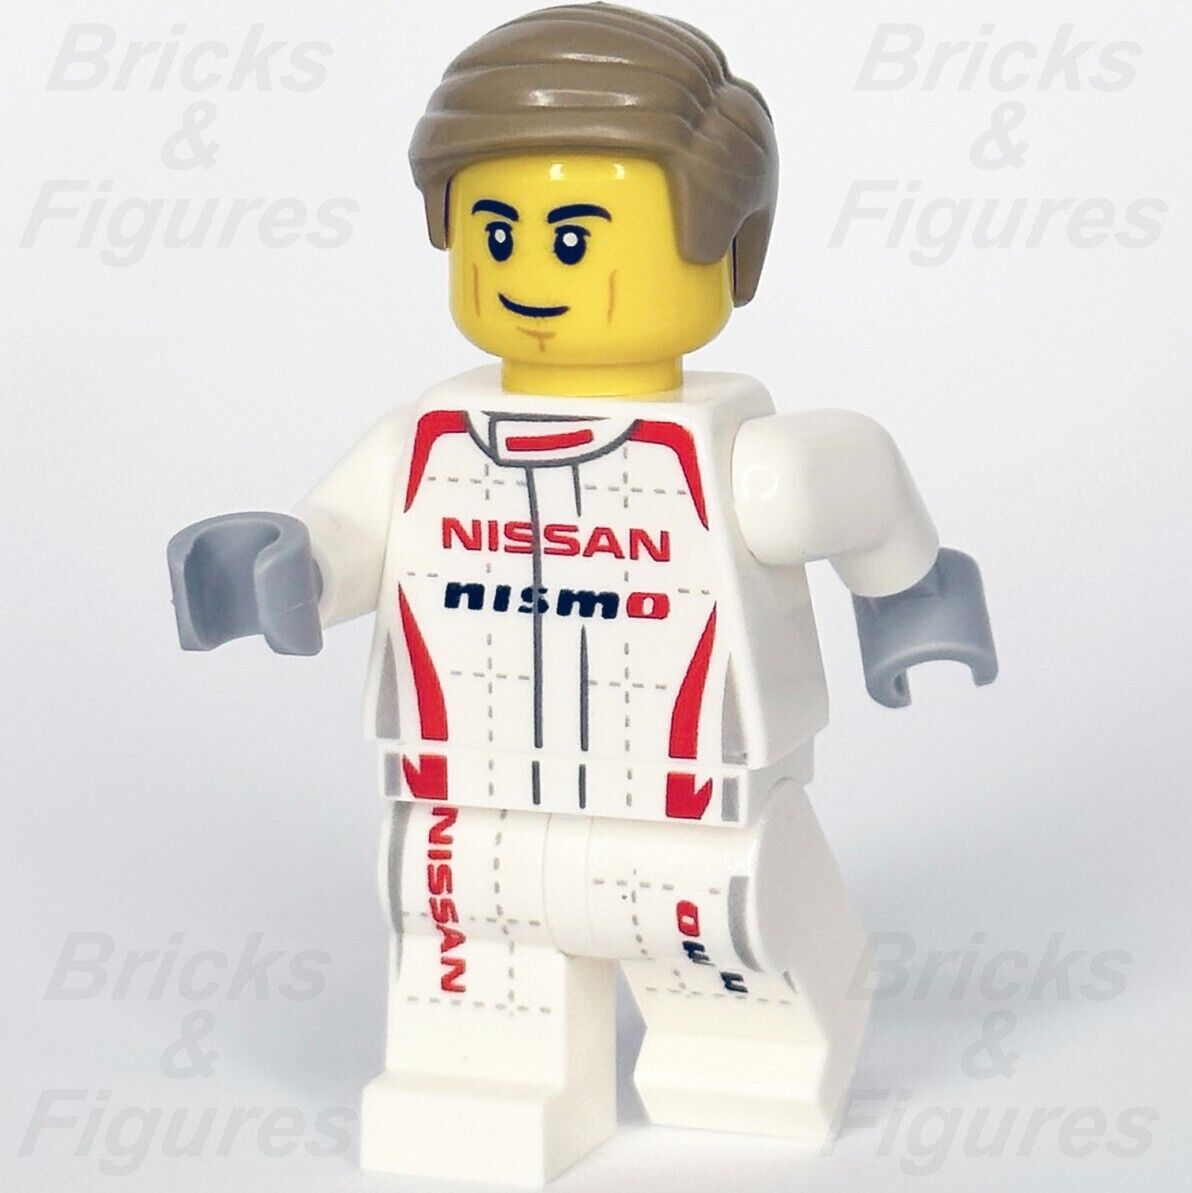 LEGO Speed Champions Nissan GT-R NISMO Driver Minifigure Racing 76896 sc081 1